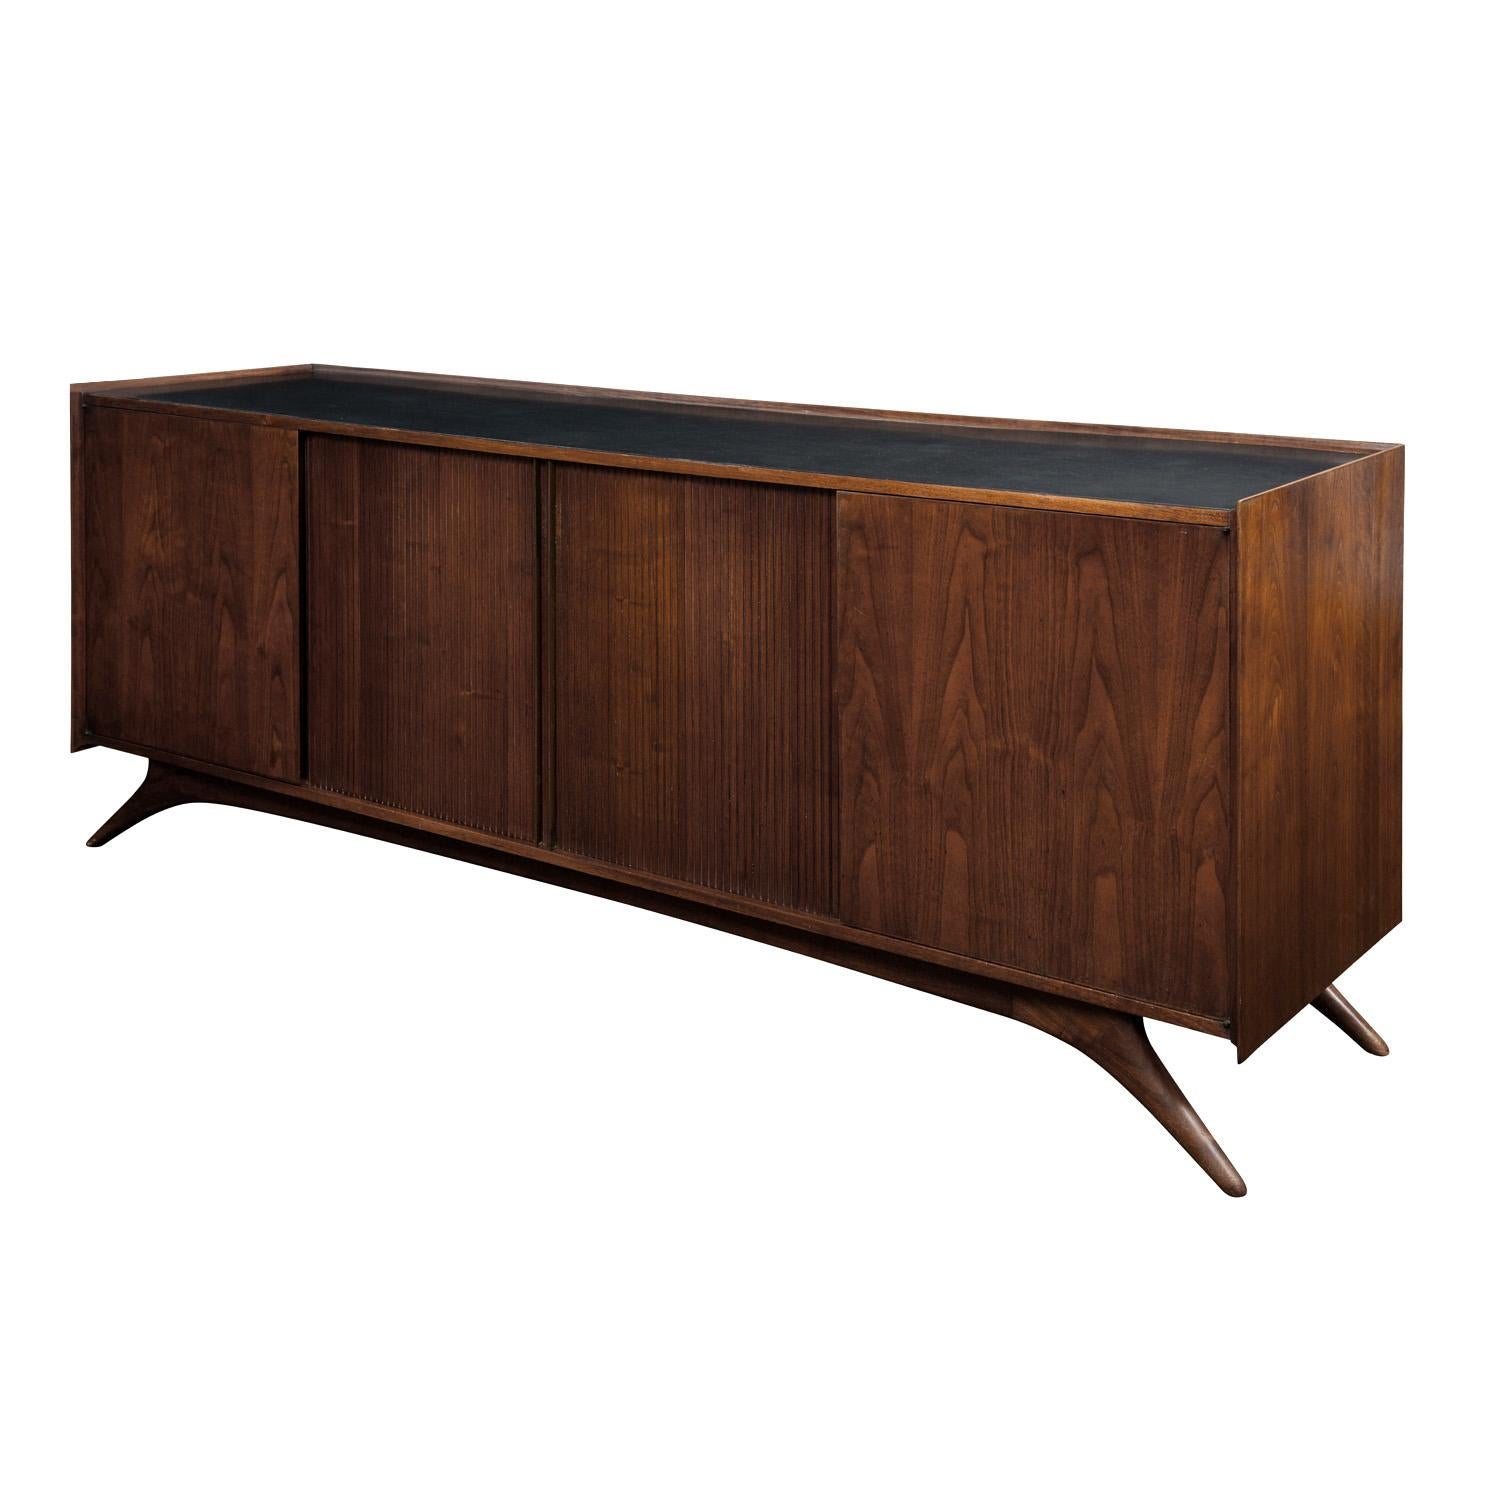 Credenza in walnut with signature splayed legs, tambour doors and black laminate top by Vladimir Kagan for Grosfeld House, American, 1950's. A beautiful Kagan design.

Reference:
The Complete Kagan published by Pointed Leaf Press LLC in 2004, pages